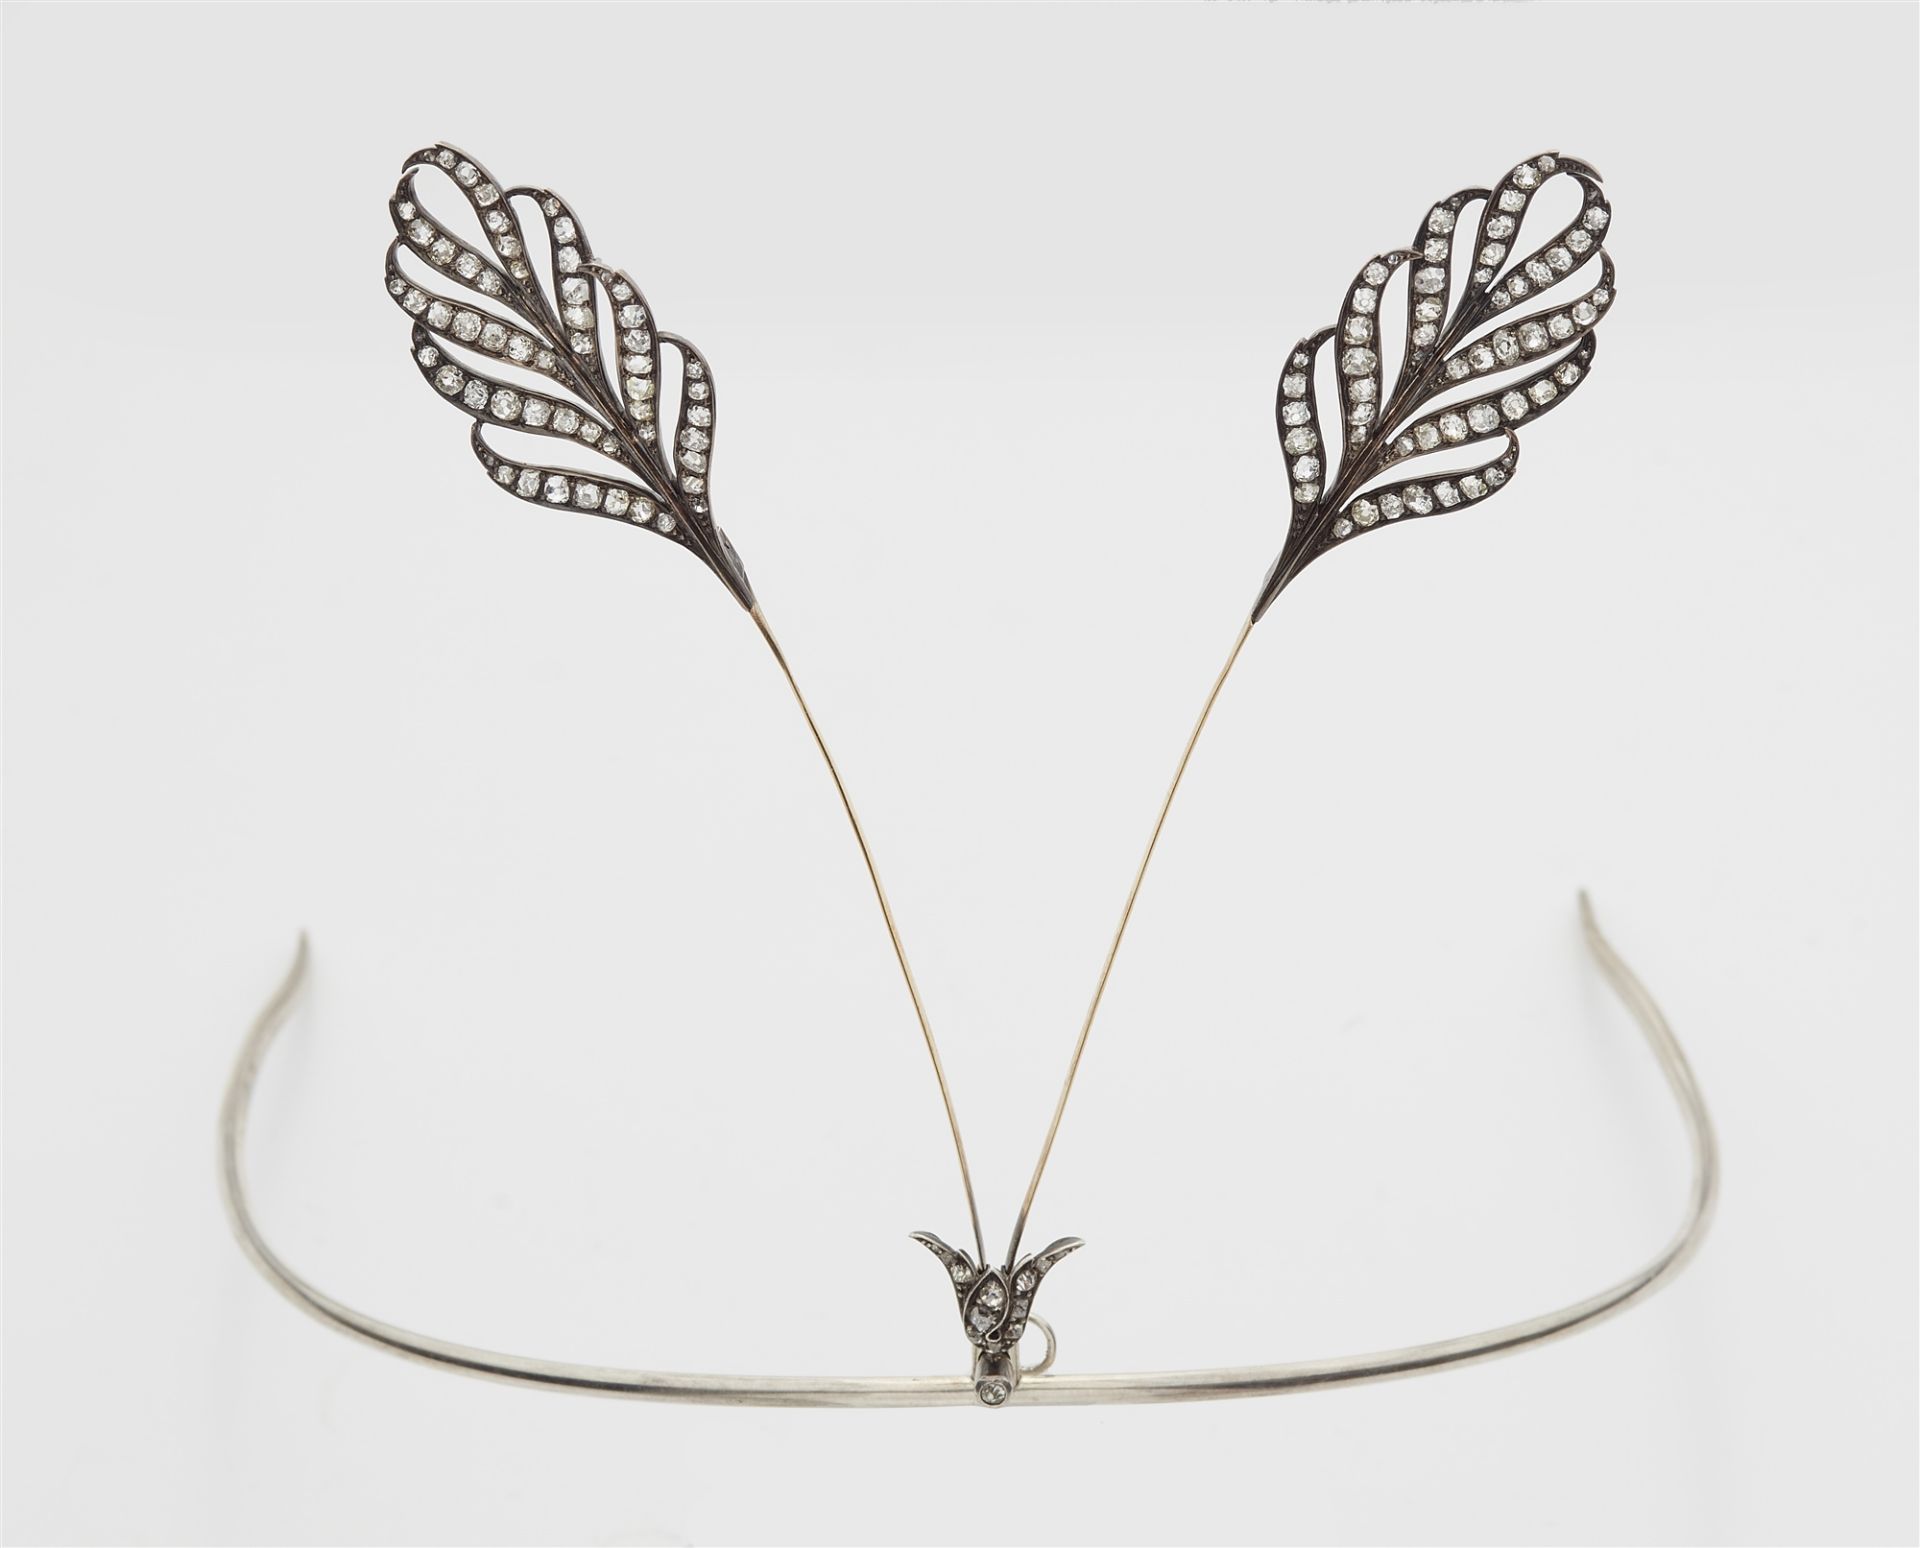 A silver 14k gold and diamond tremblant feather aigrette headdress.